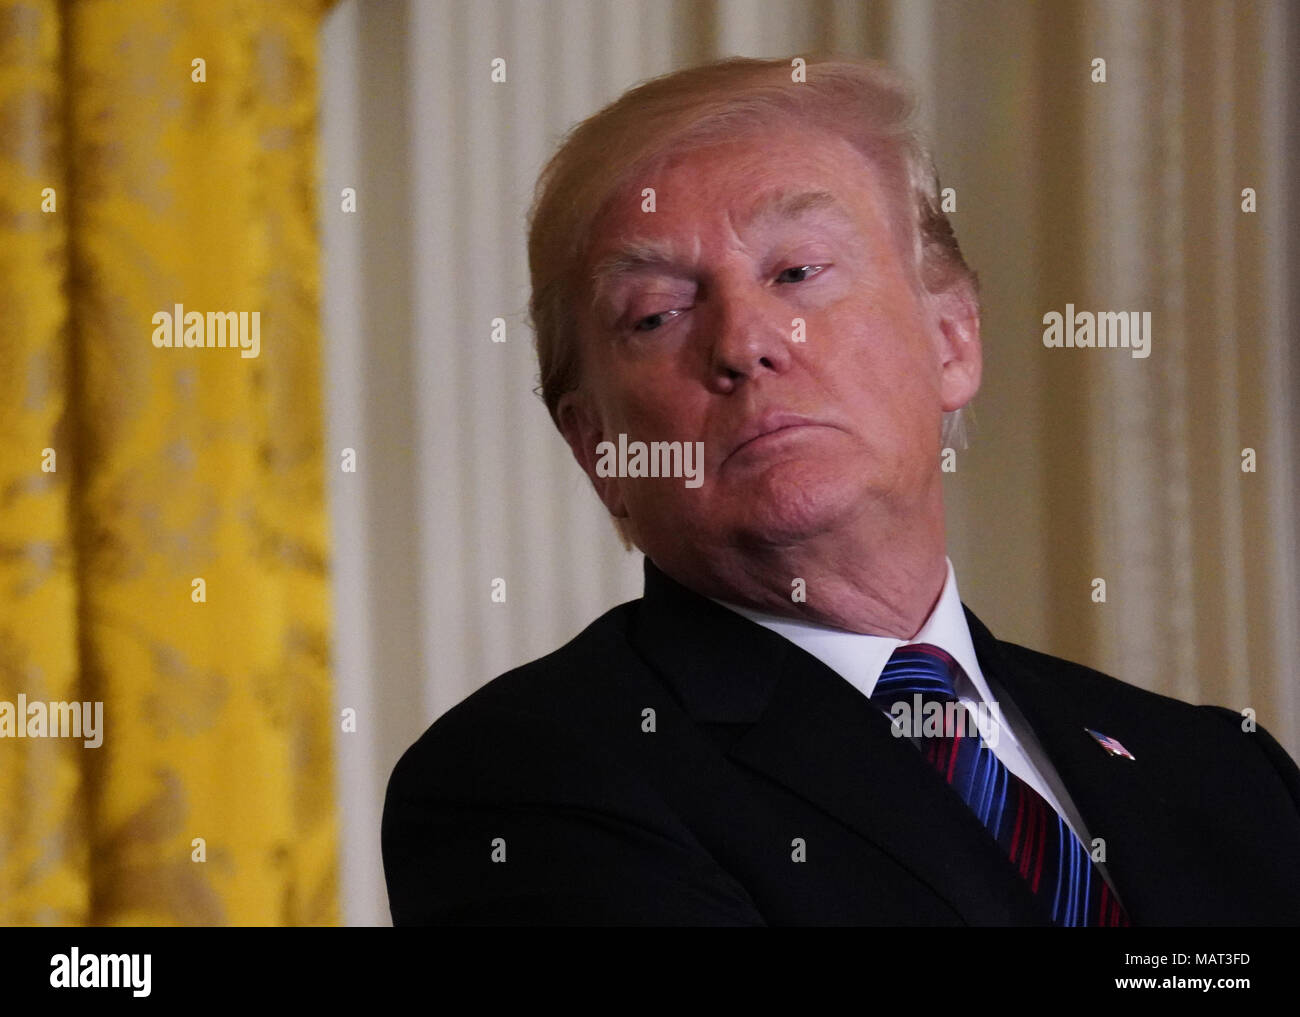 Washington, USA. 3rd April, 2018. President Donald Trump participates in a press conference with leaders of the Baltic states on April 3, 2018.   Photo by Dennis Brack Credit: Dennis Brack/Alamy Live News Stock Photo